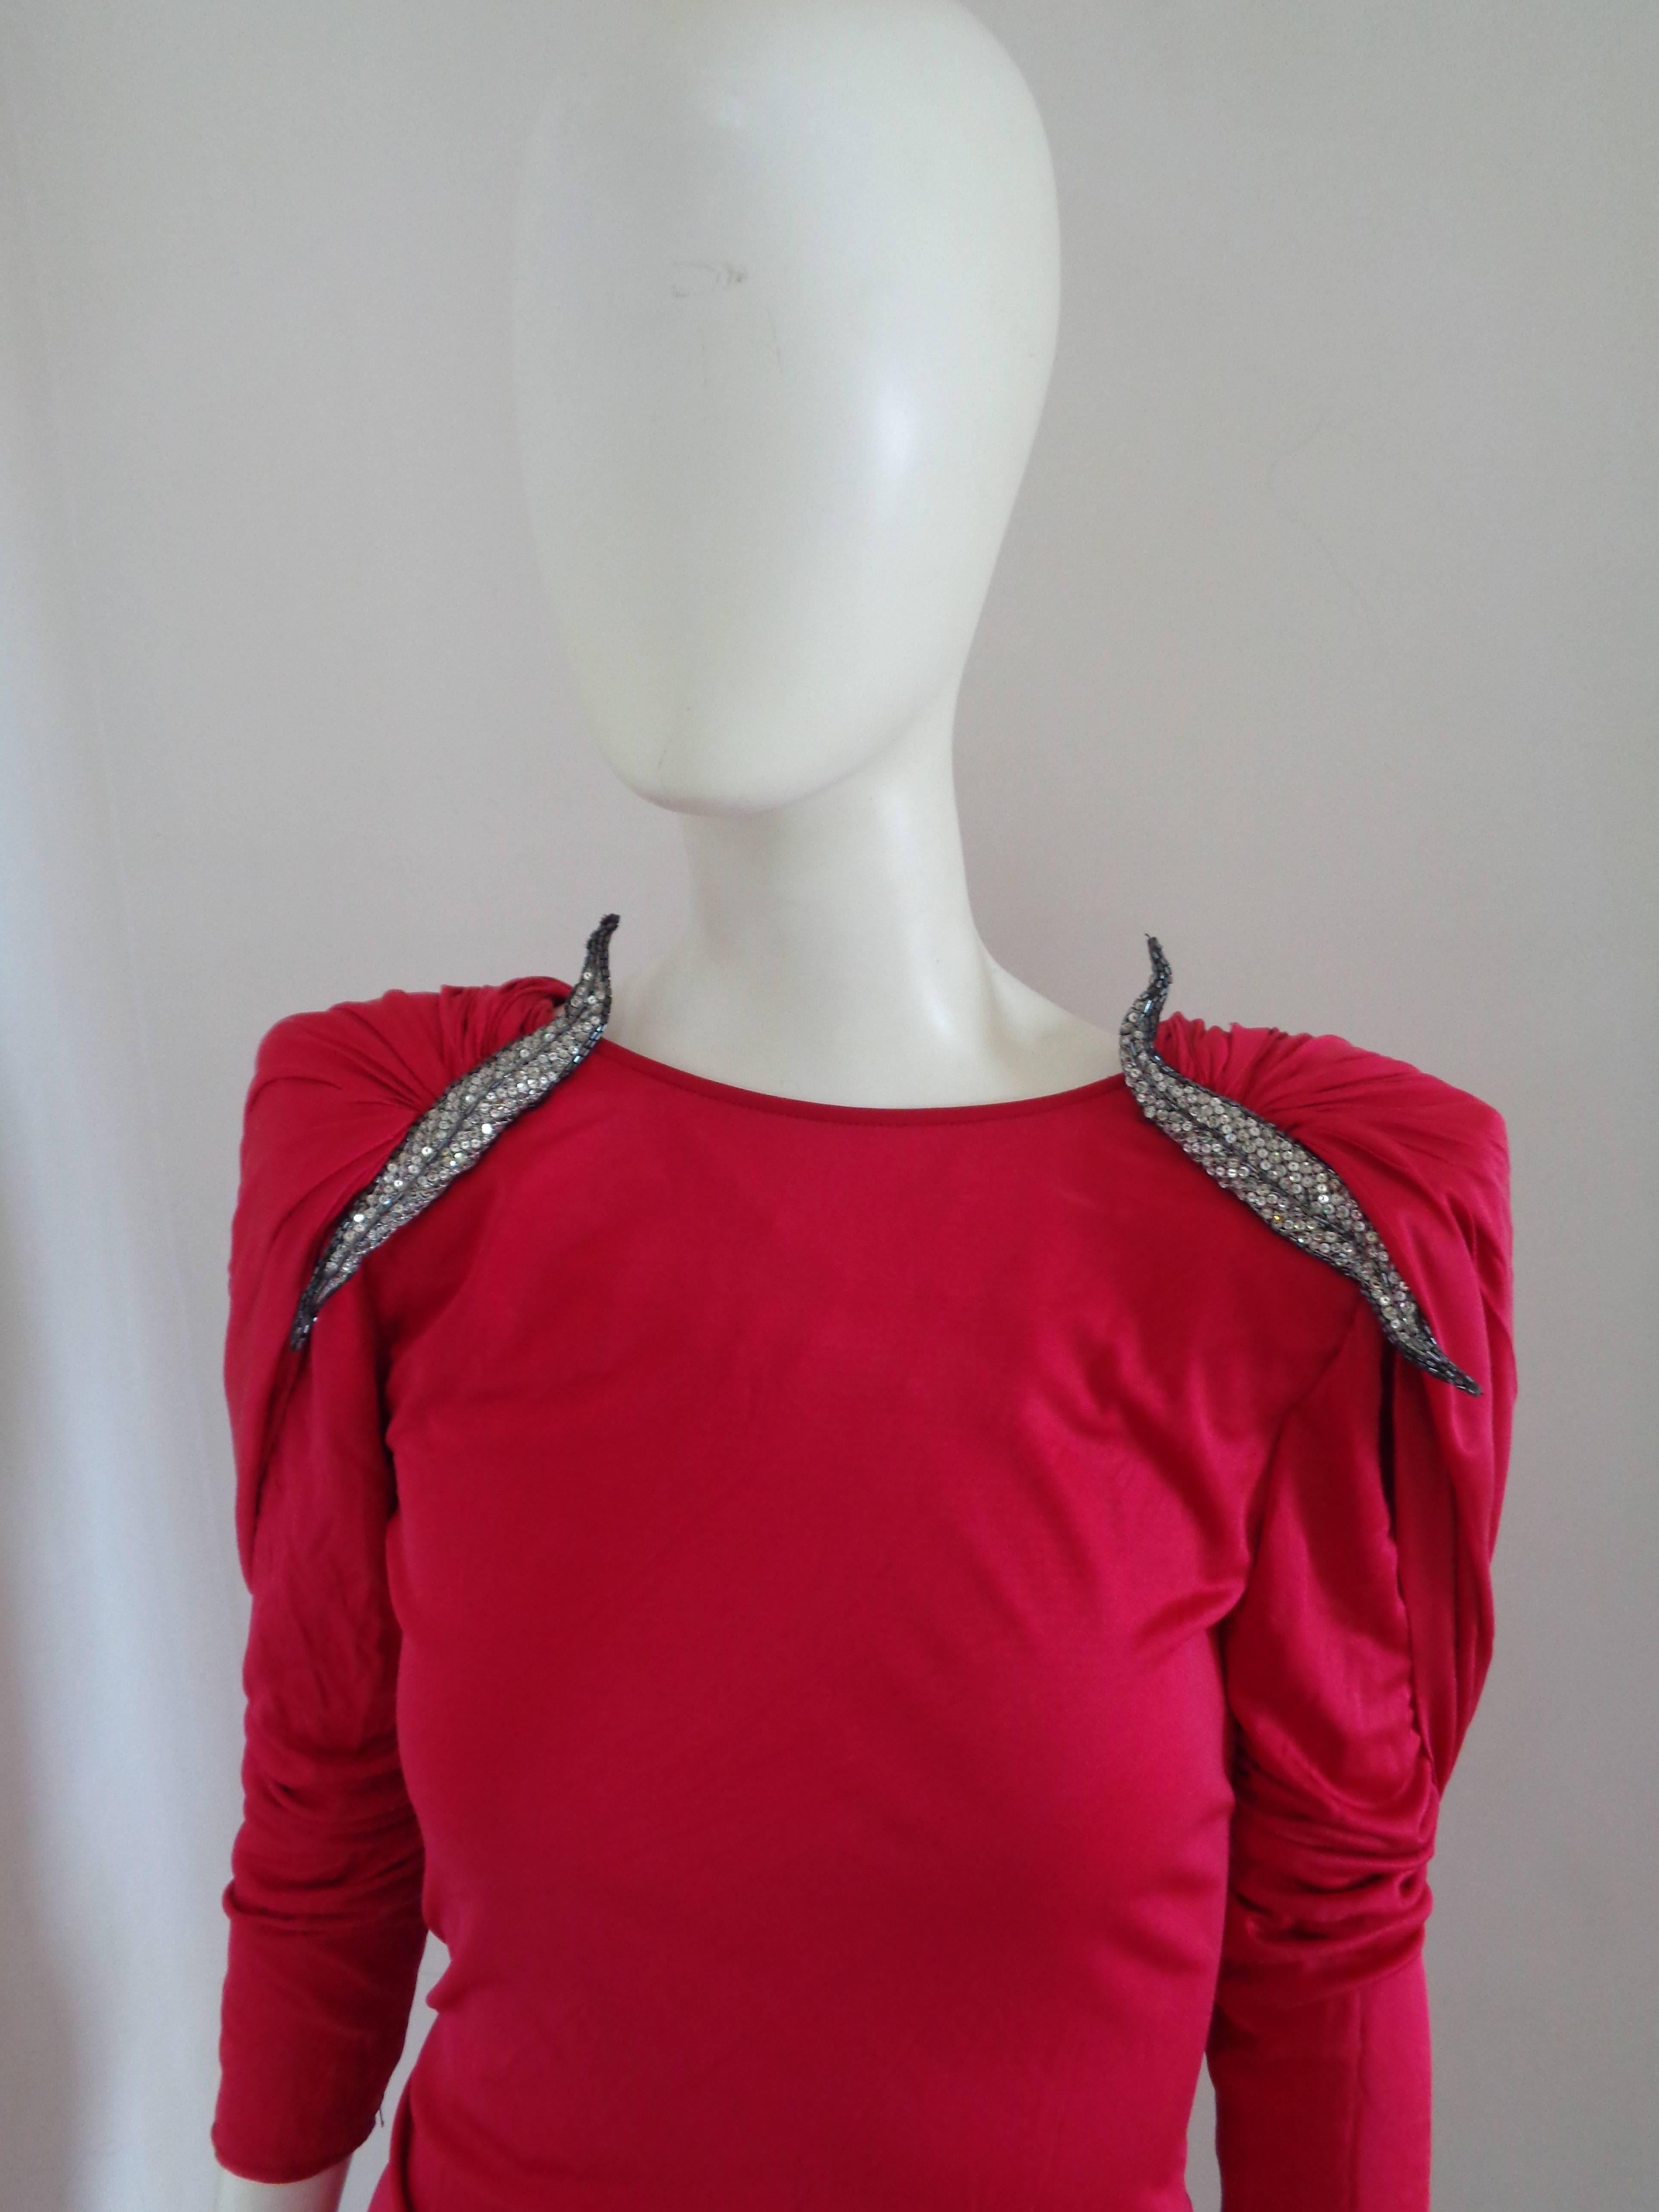 Valentino Boutique Fucsia Silk Dress NWOT

Embellished with silver sequins over arms close to neck
Still with original tags
Totally made in italy in size 6
Composition: Silk
